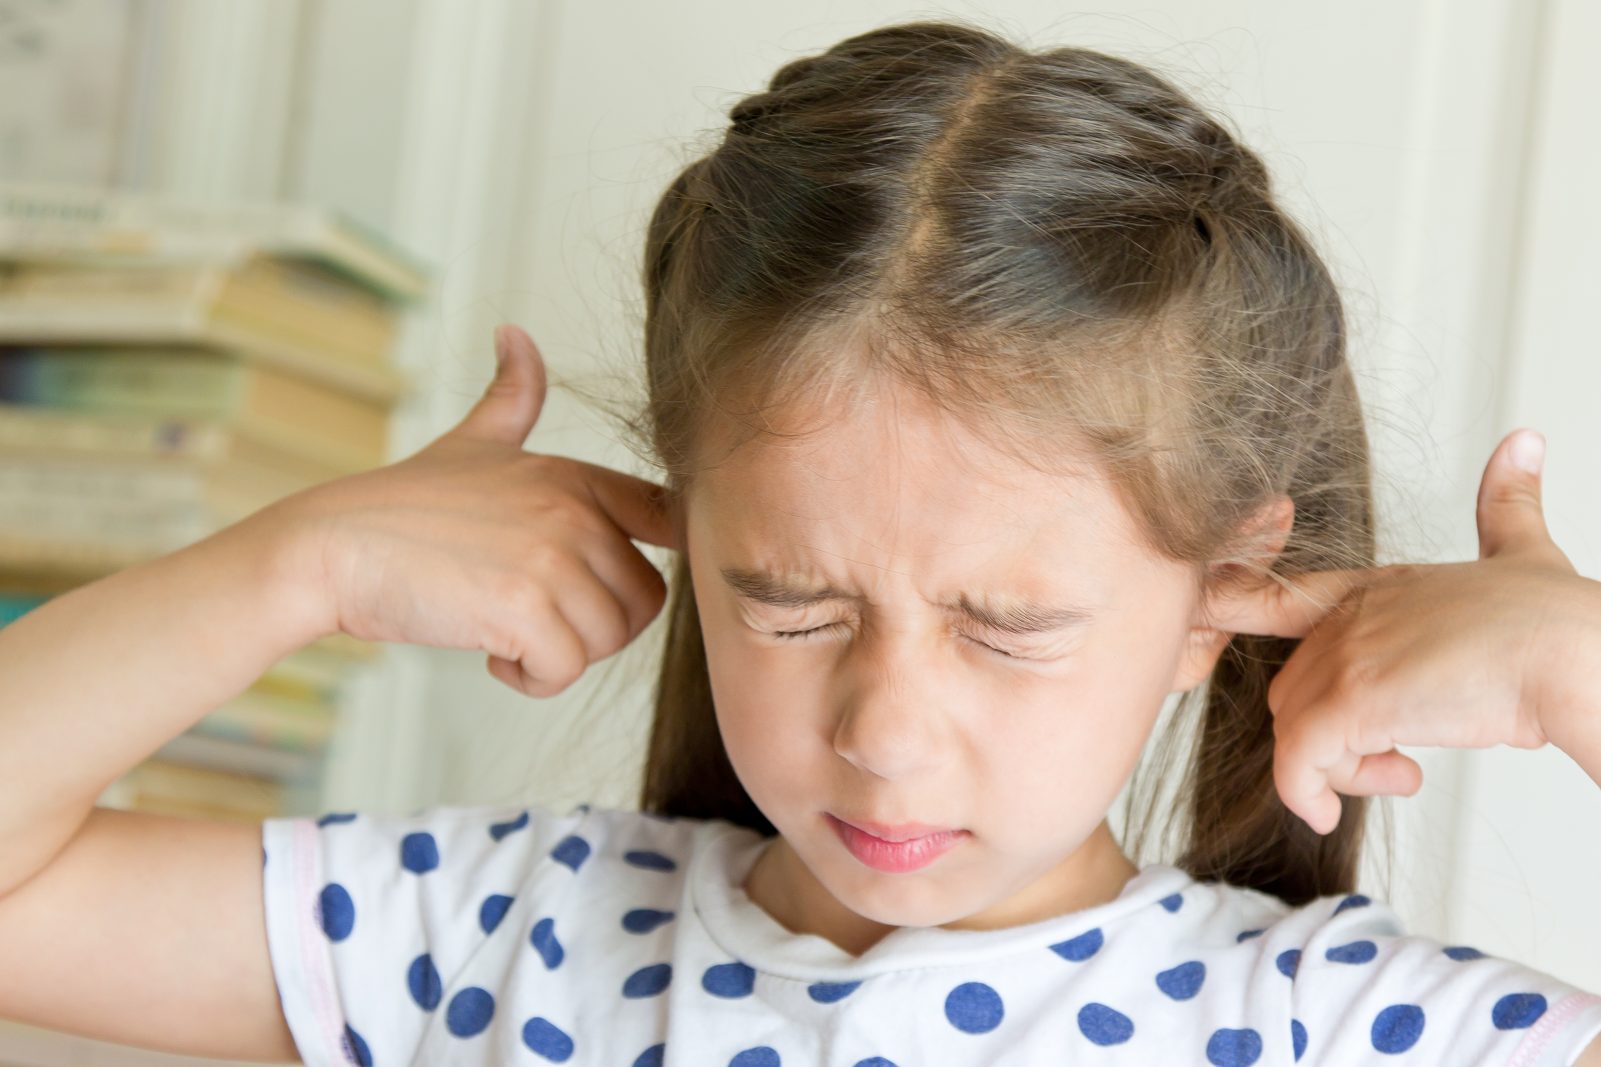 What Sound Are You? Little girl covering her ears